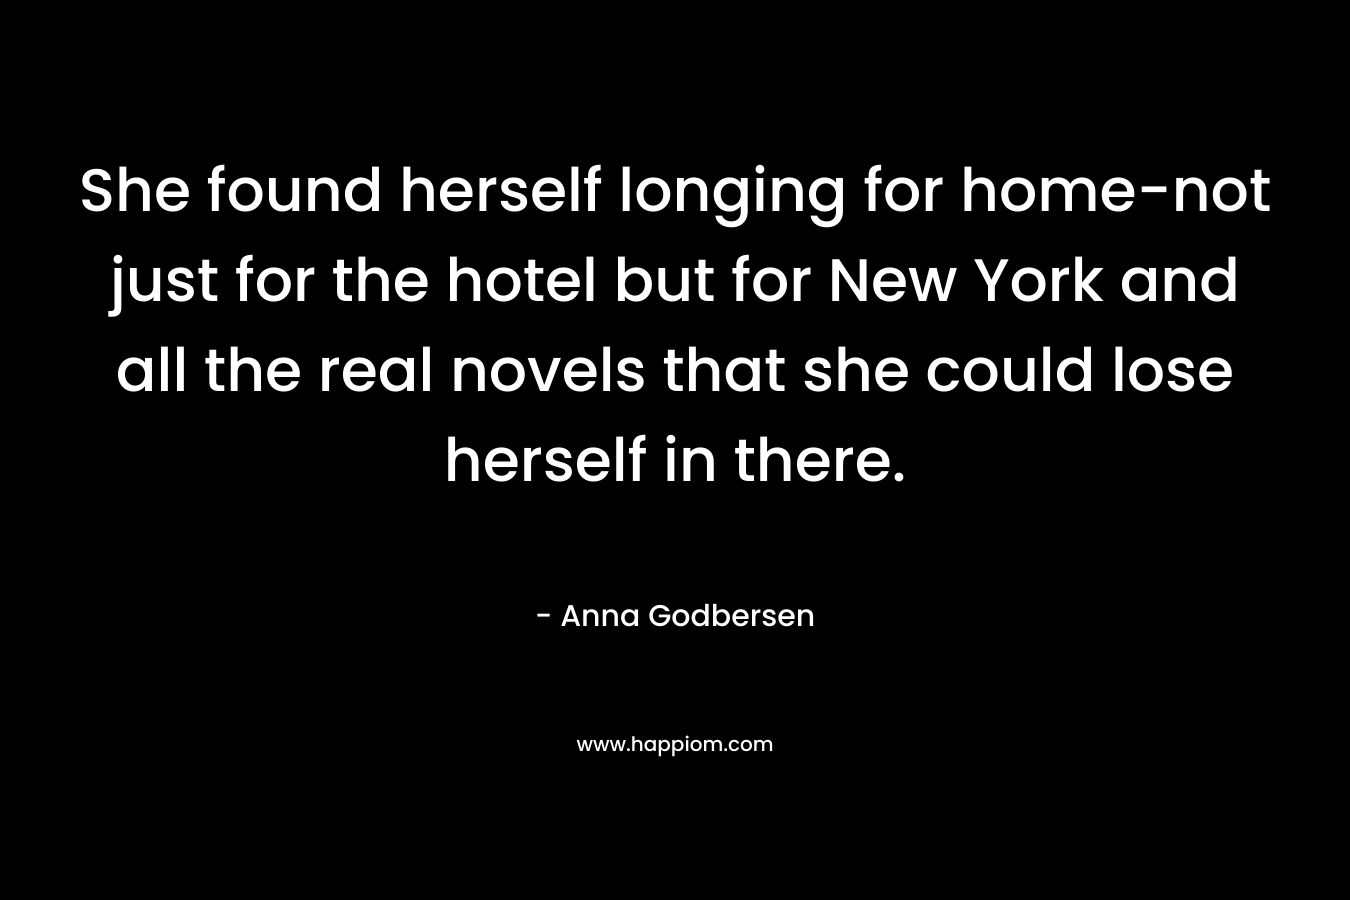 She found herself longing for home-not just for the hotel but for New York and all the real novels that she could lose herself in there.